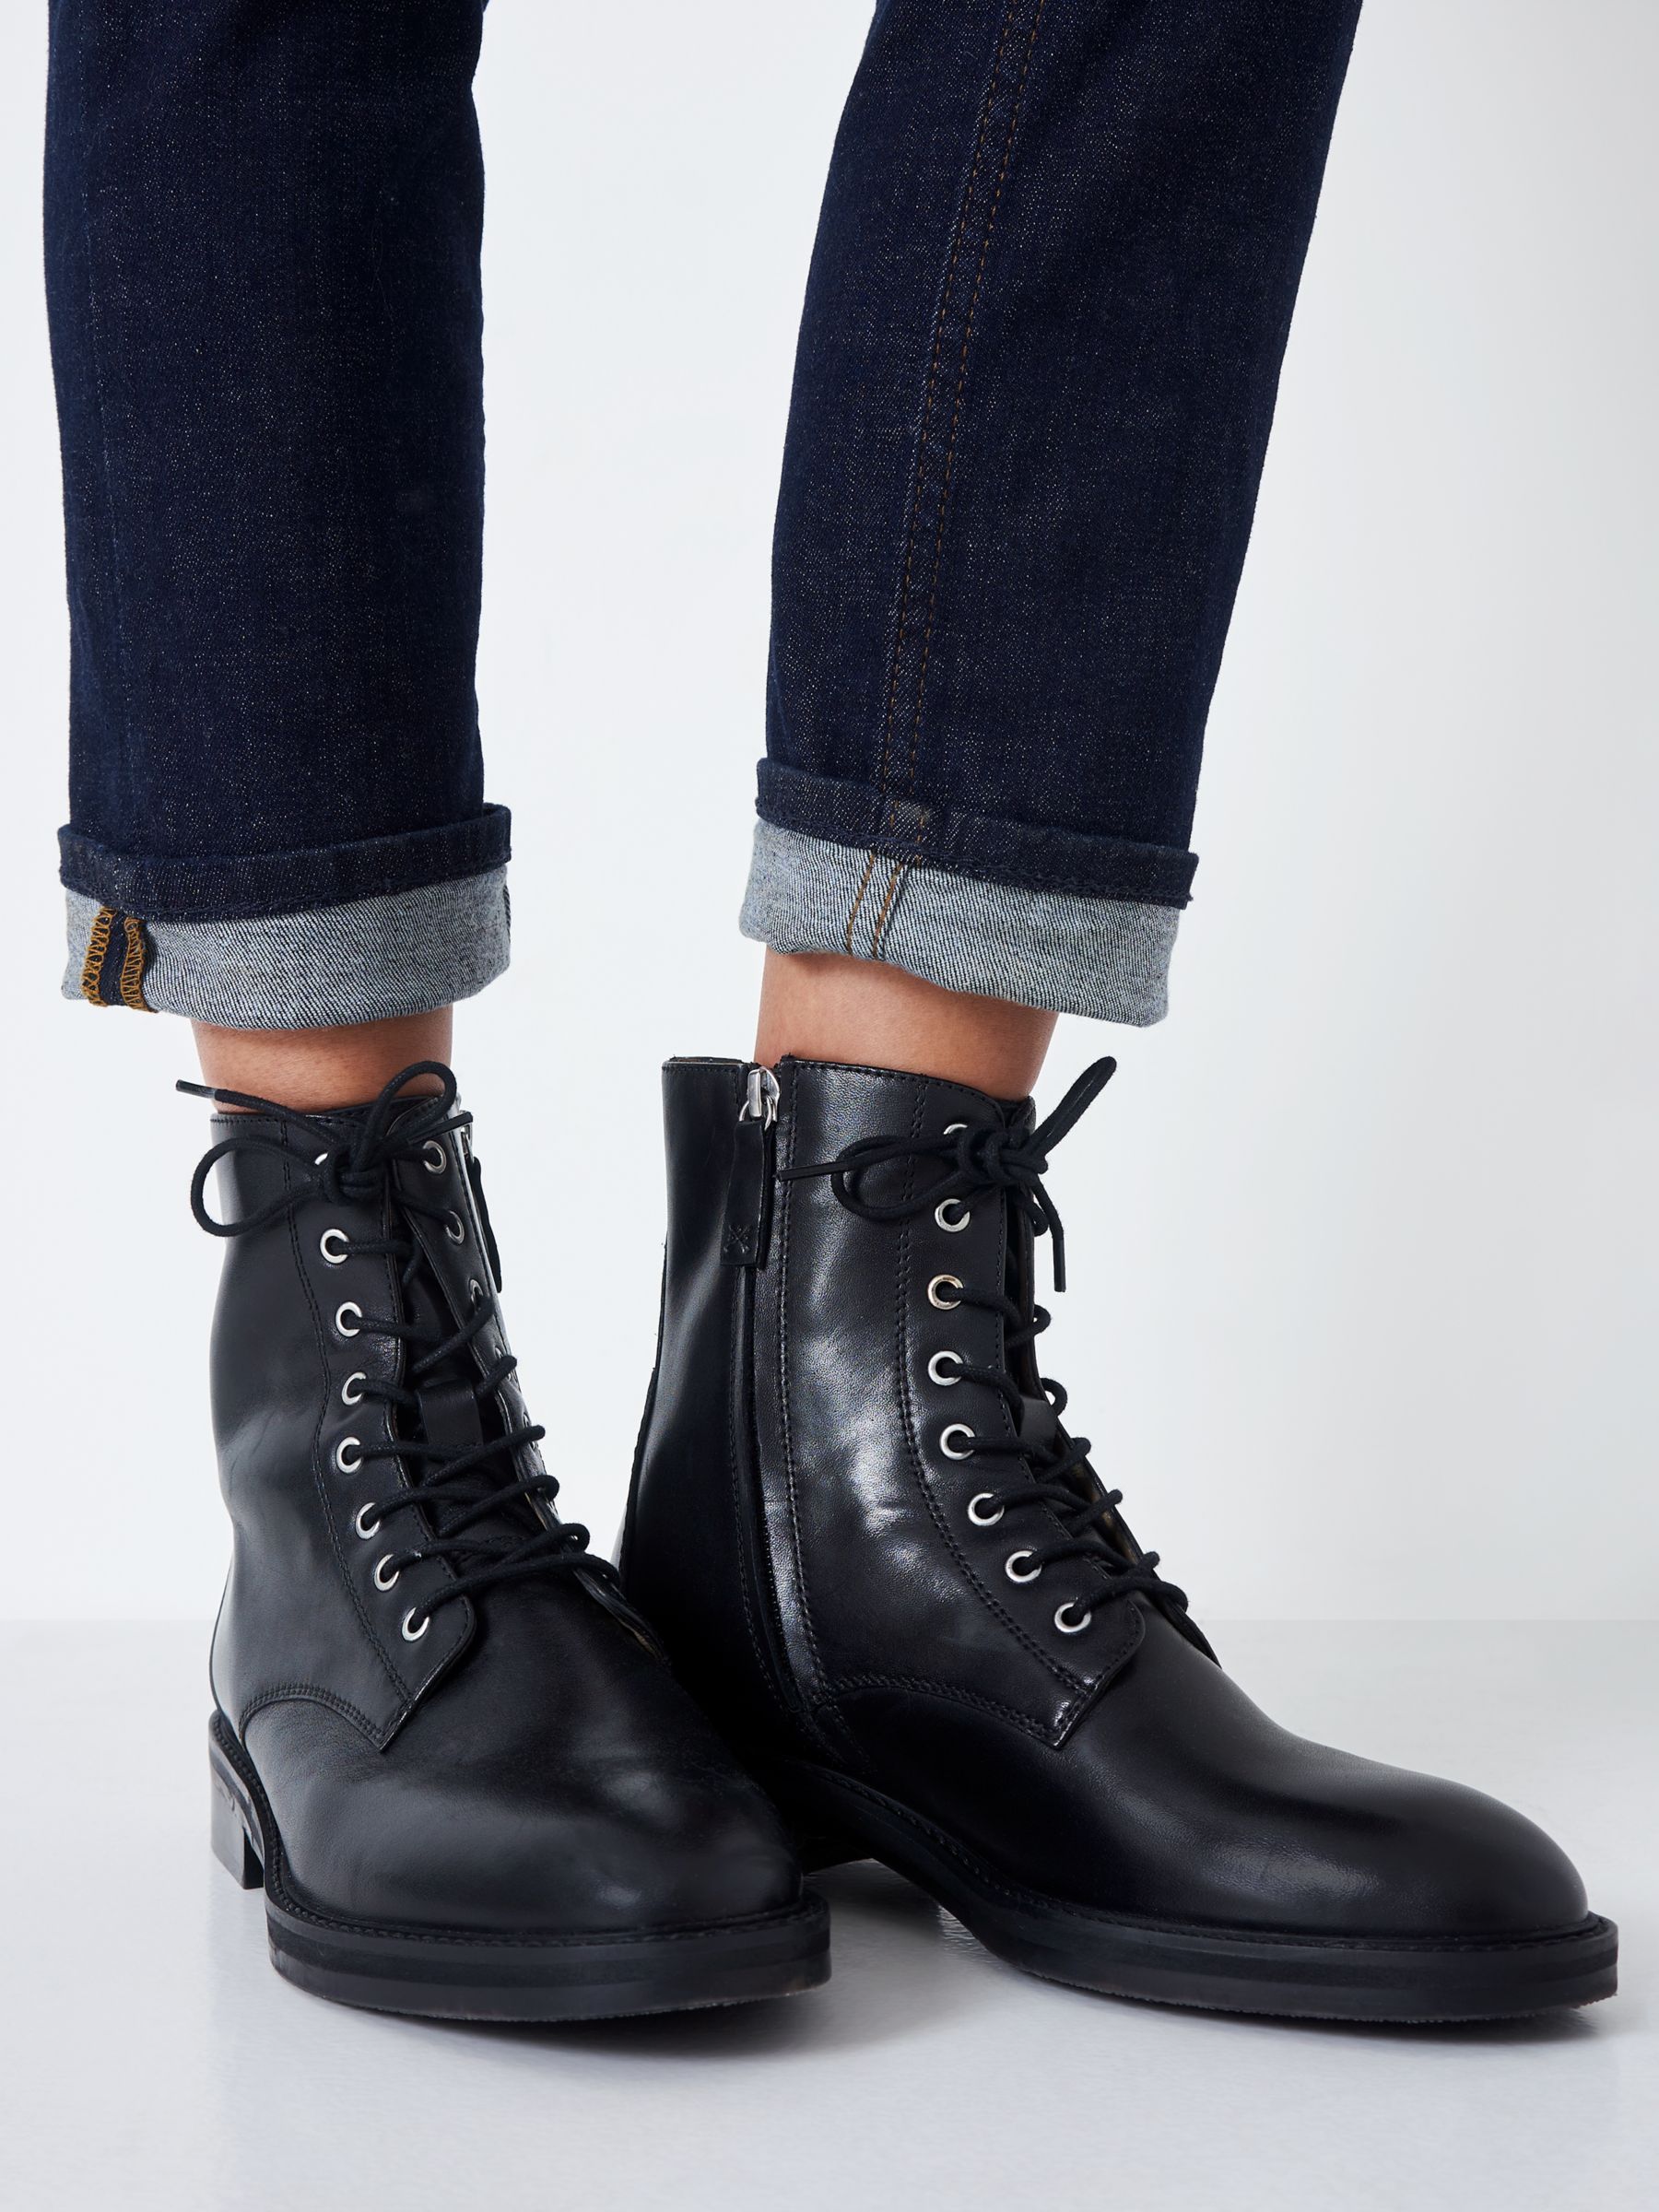 Crew Clothing Juliet Leather Boots, Black at John Lewis & Partners